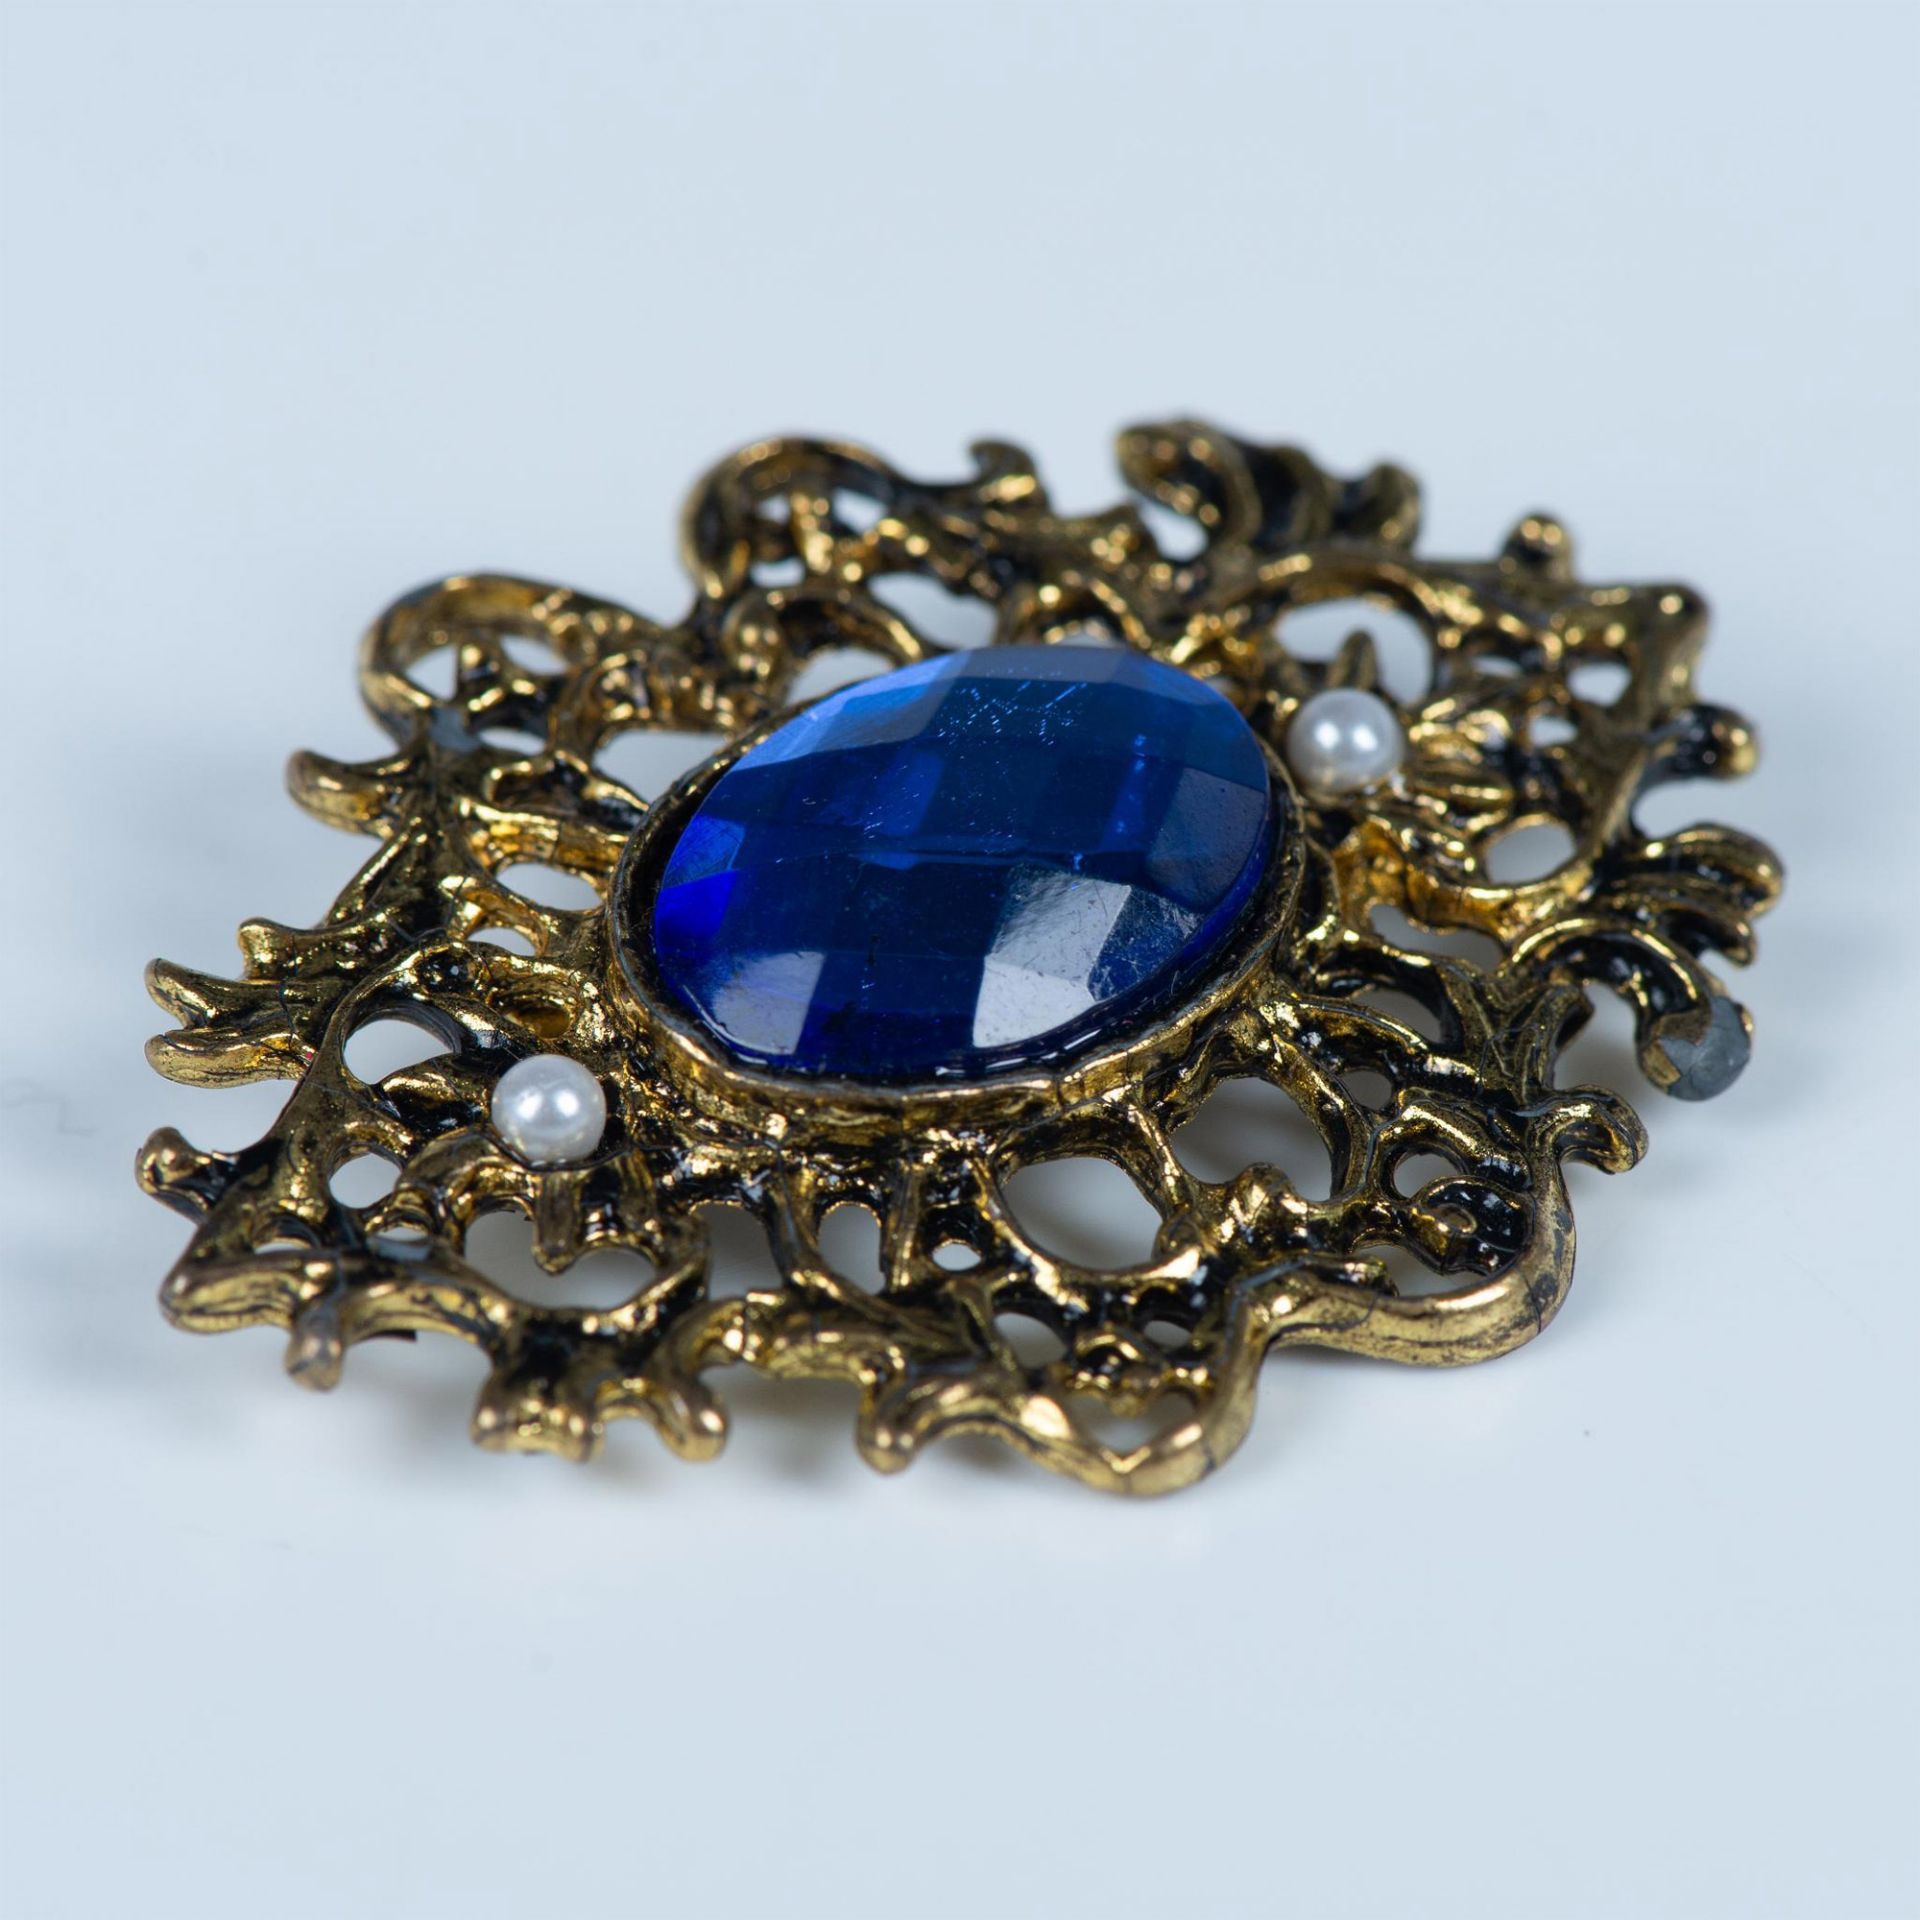 Ornate Gold Metal, Faux Pearl and Blue Rhinestone Brooch - Image 3 of 5